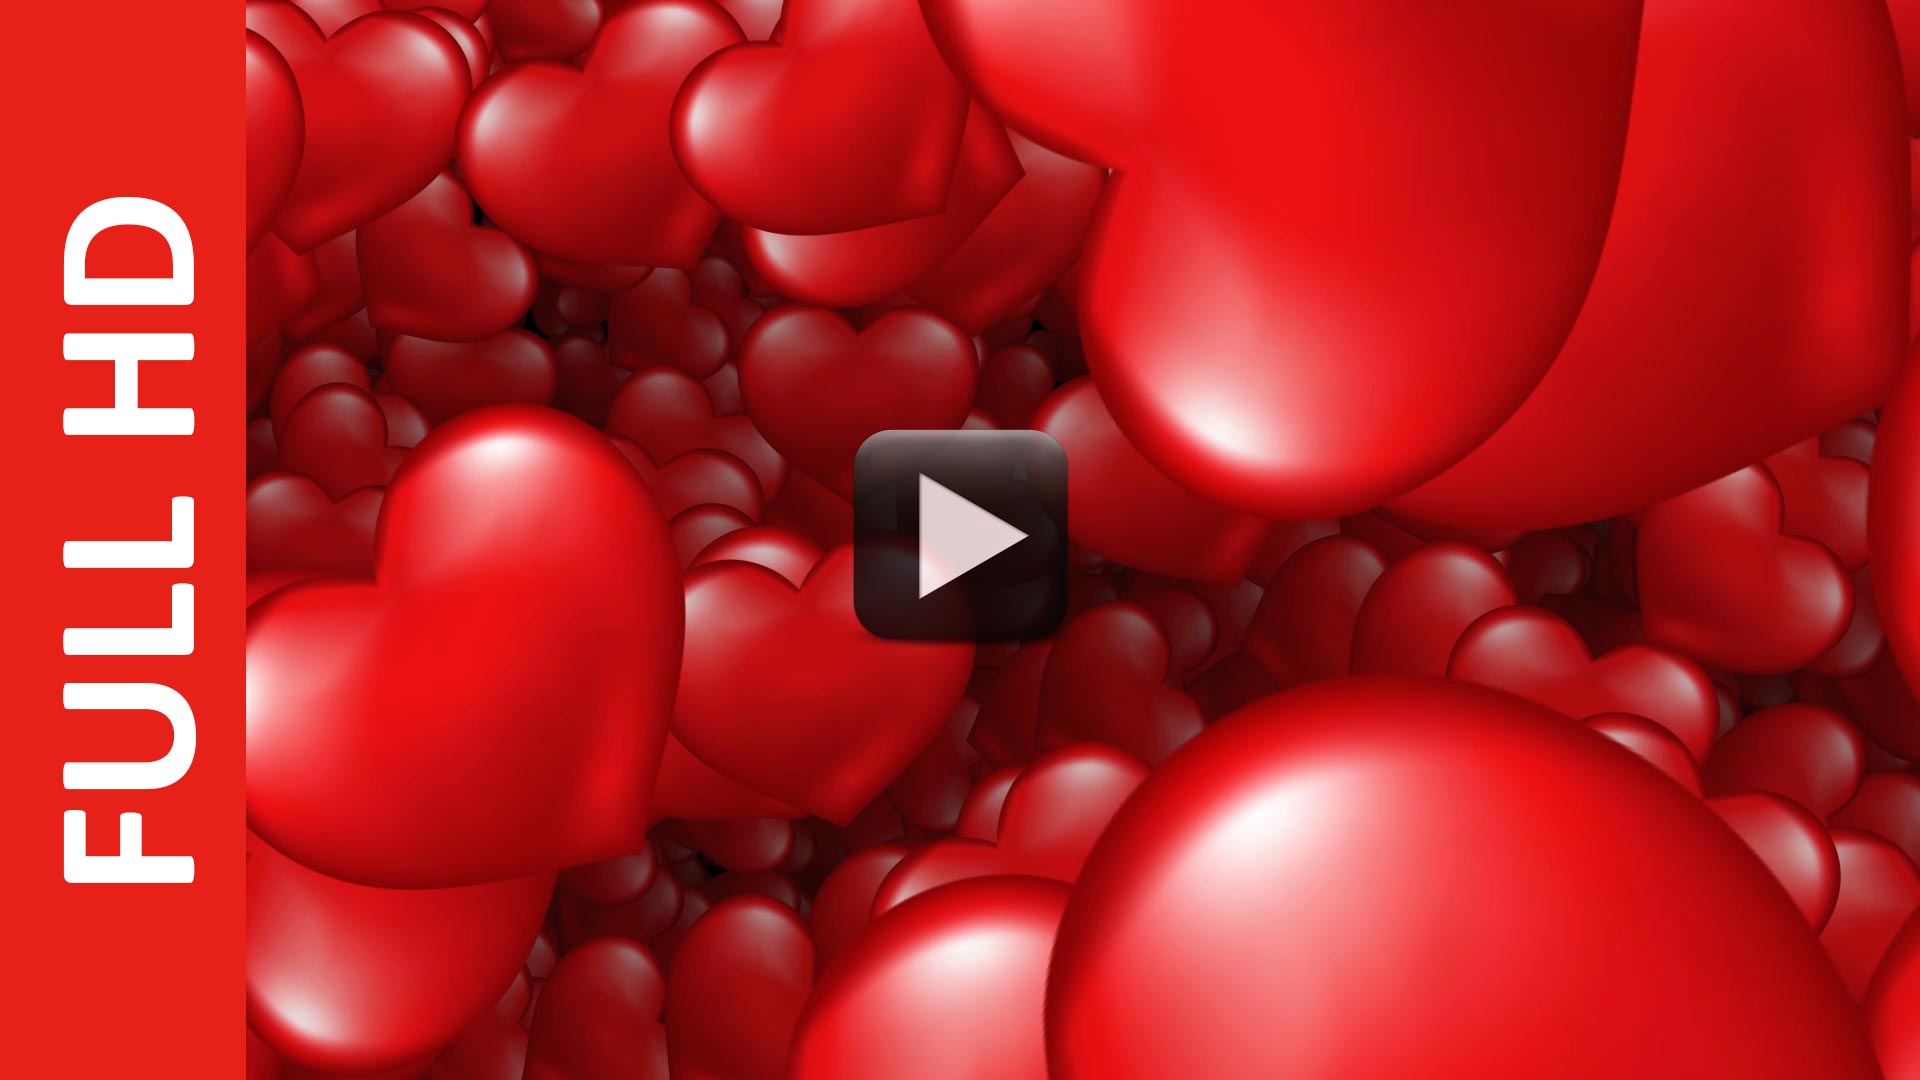 Moving Red Love Hearts Animation Background | All Design Creative